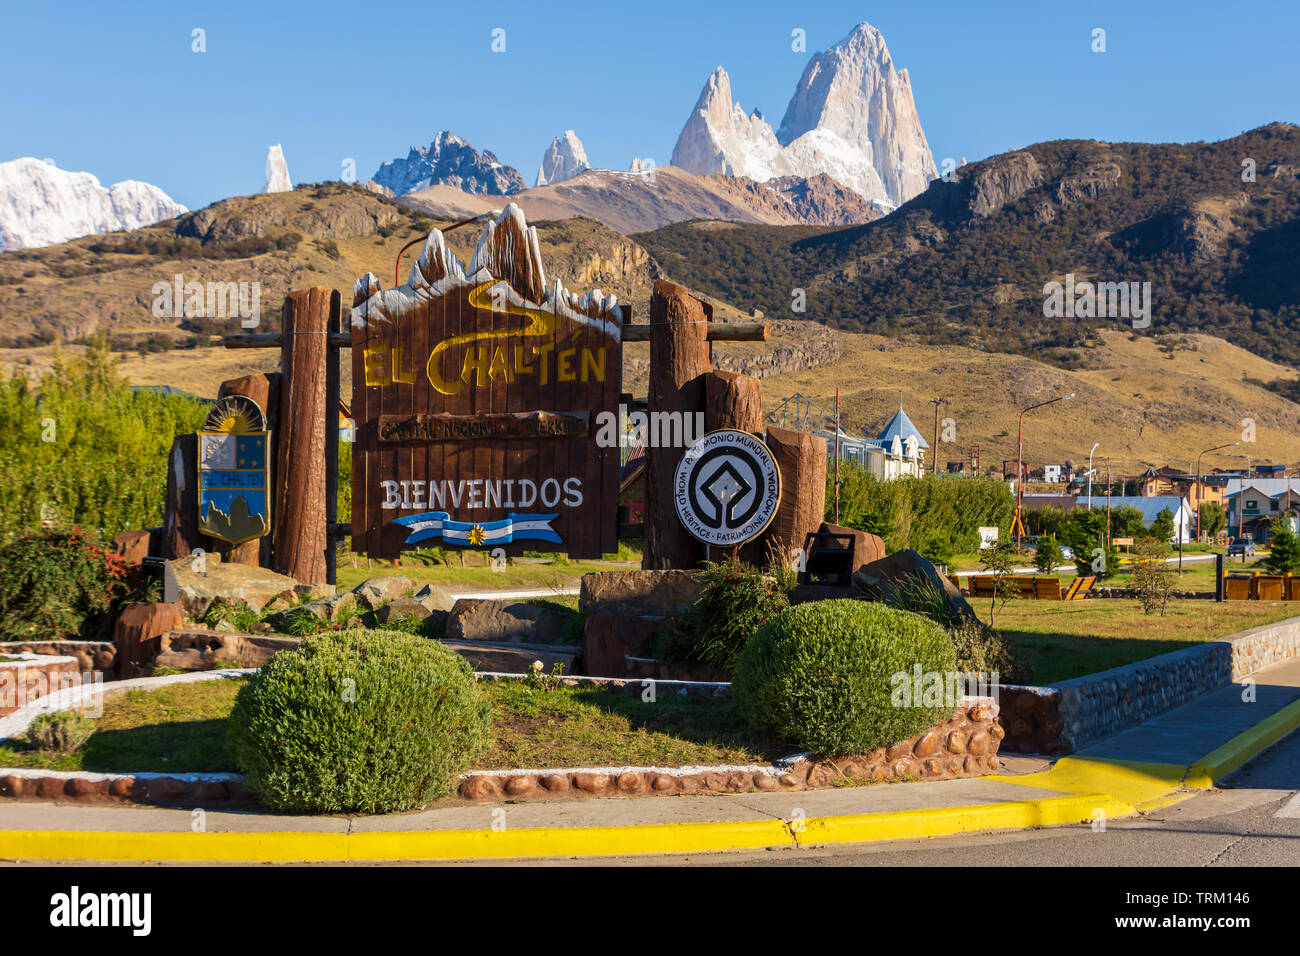 Entrance to the town of El Chalten, famous for the Fitz Roy mountain in the Patagonia region of Argentina. The area is a UNESCO heritage site. Stock Photo